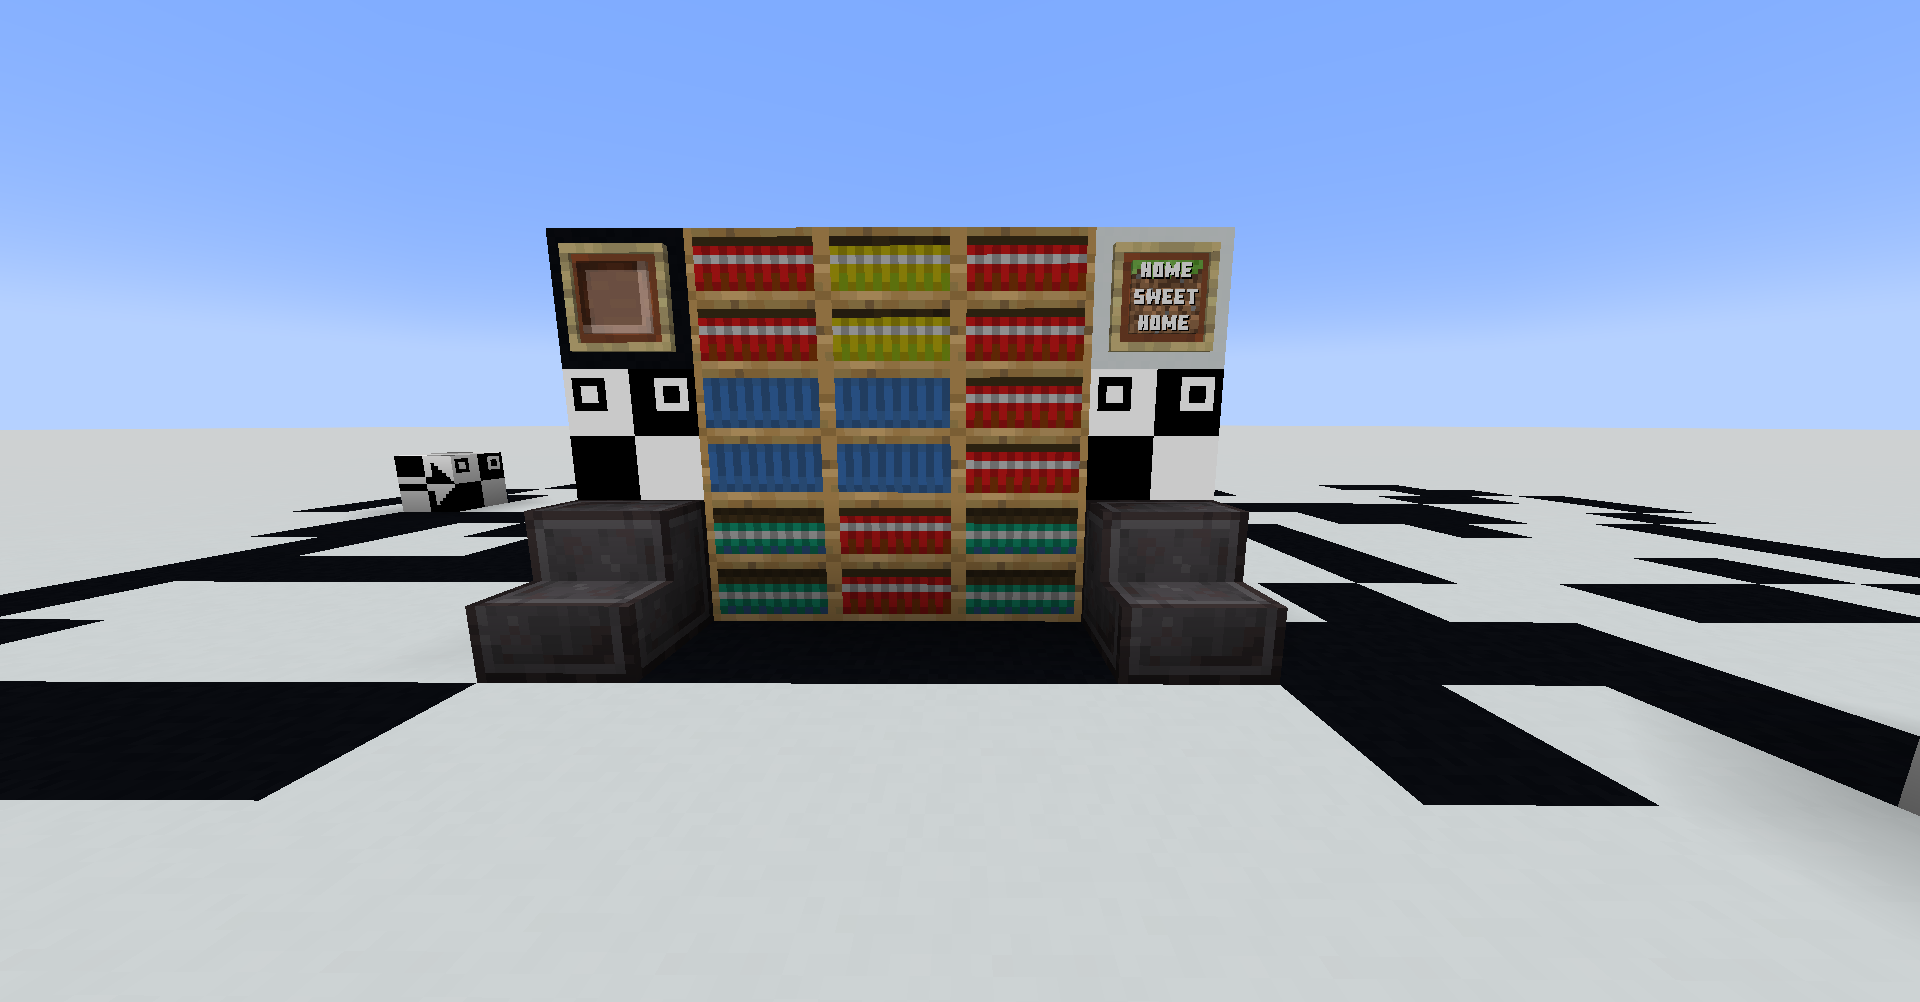 A screenshot from a superflat world made entirely of white concrete. Prominently featured are the Box of Infinite Books, Cursor, A Very Fine Item, An Ant, Footprint, and Netherite Stairs from 20w14infinite. In the background, two An Ant blocks are changing white concrete blocks into black concretes.